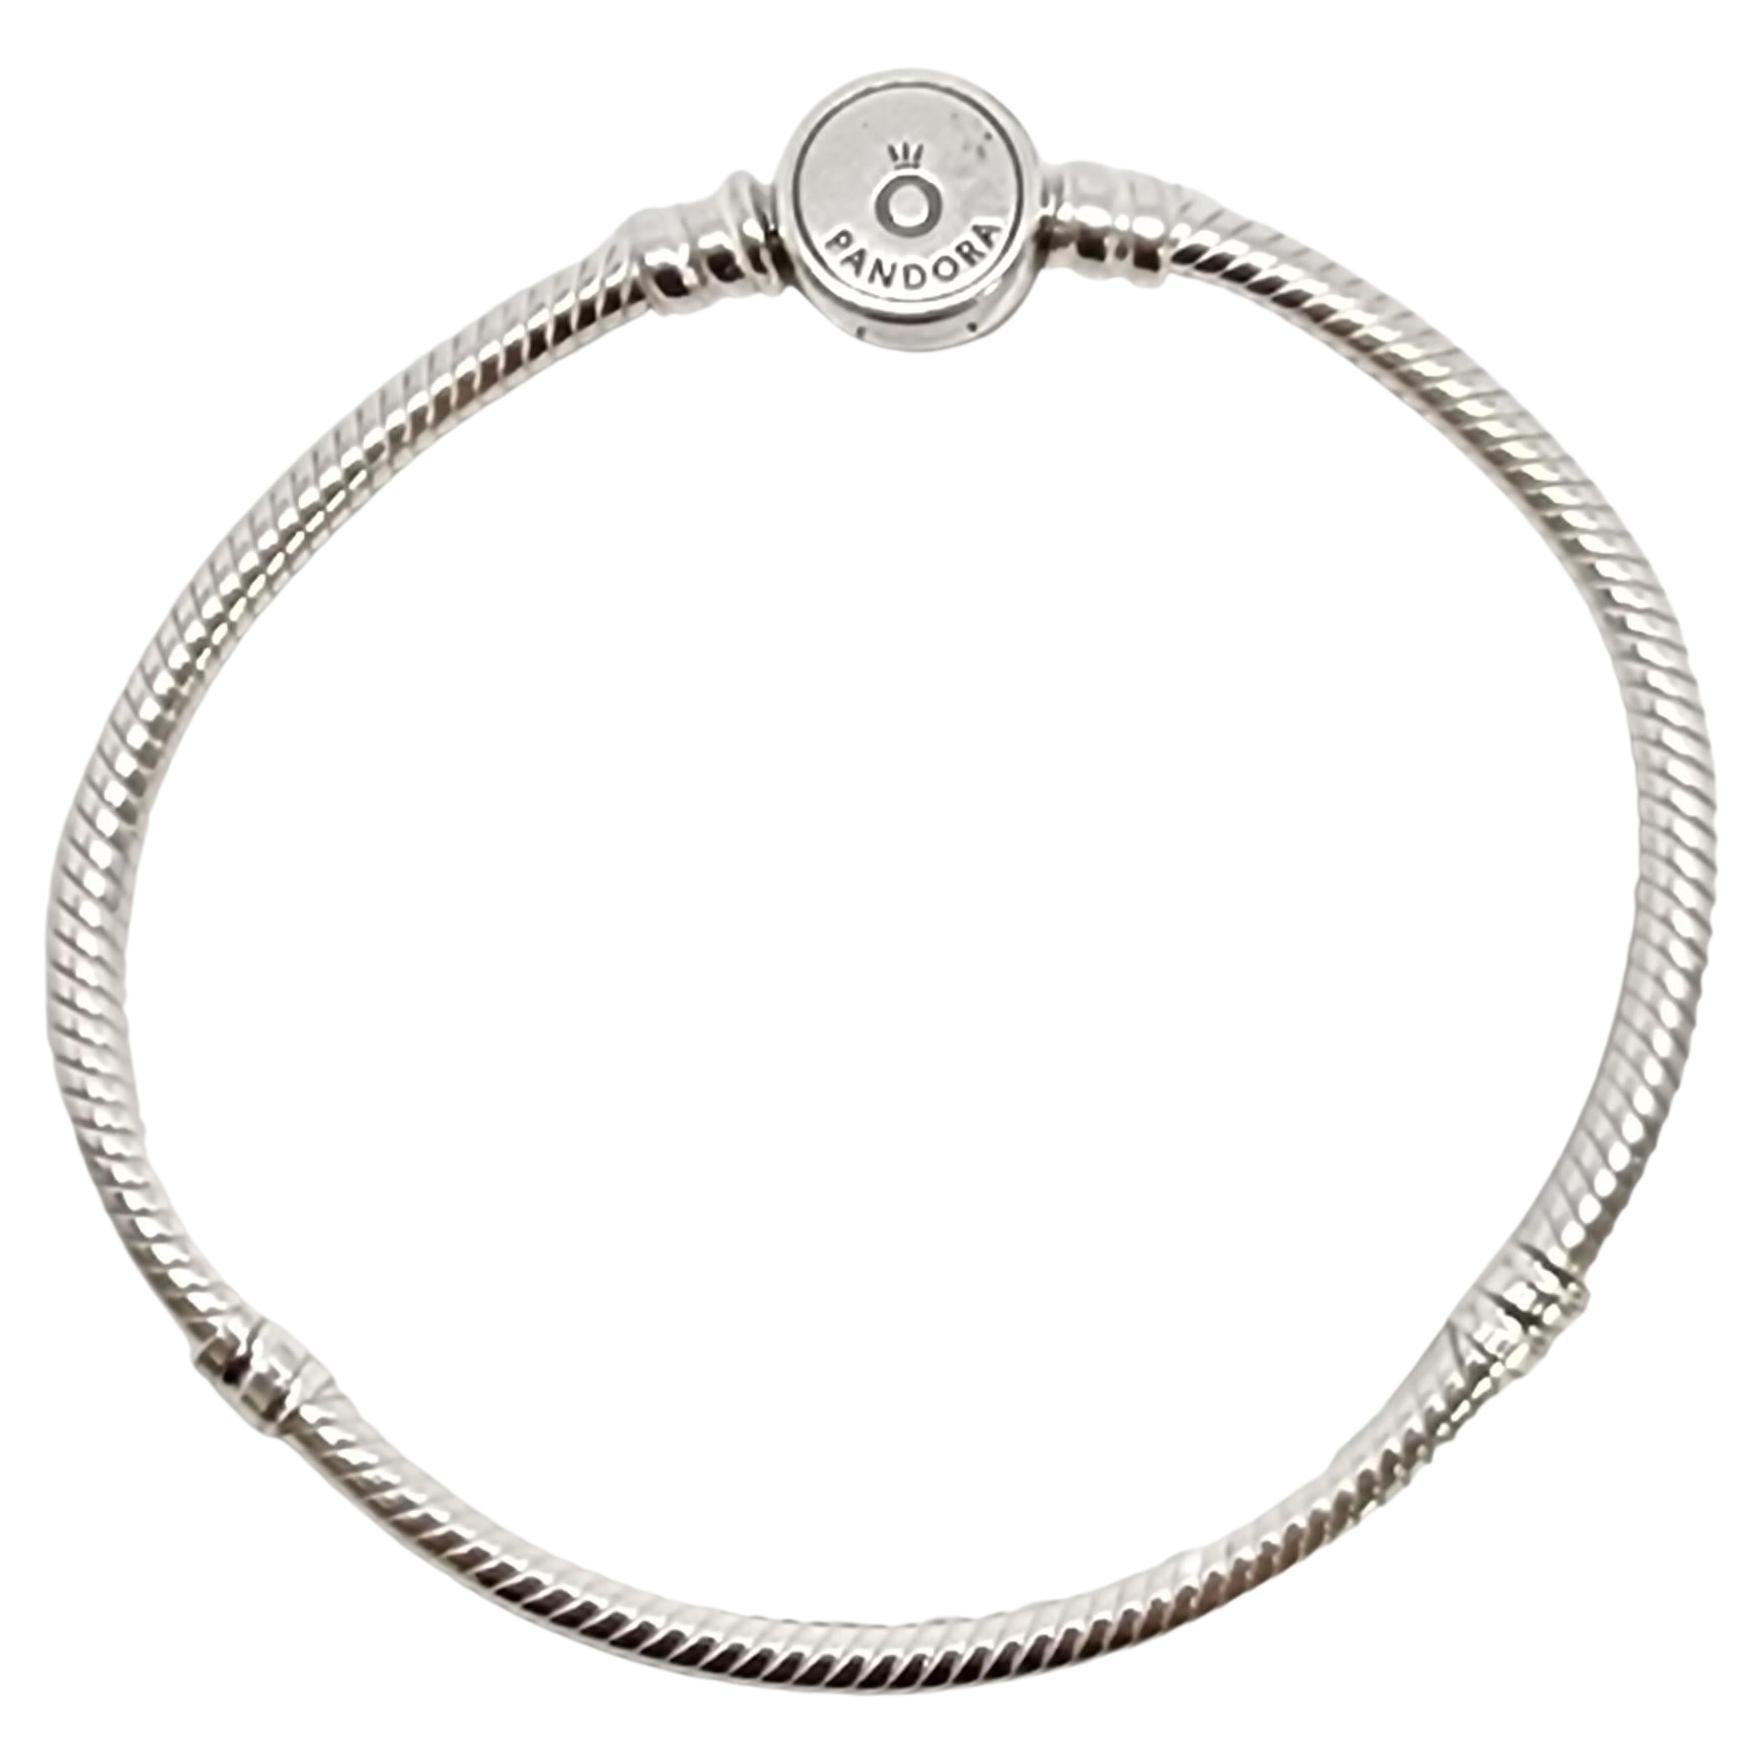 Authentic Pandora Moments Sterling Silver Sparkling Blue Disc Clasp Snake Chain Bracelet.

#599288CO1

Pandora's iconic snake chain bracelet featuring a disc clasp adorned in small blue stones on one side, and a polished back with Pandora Crown O